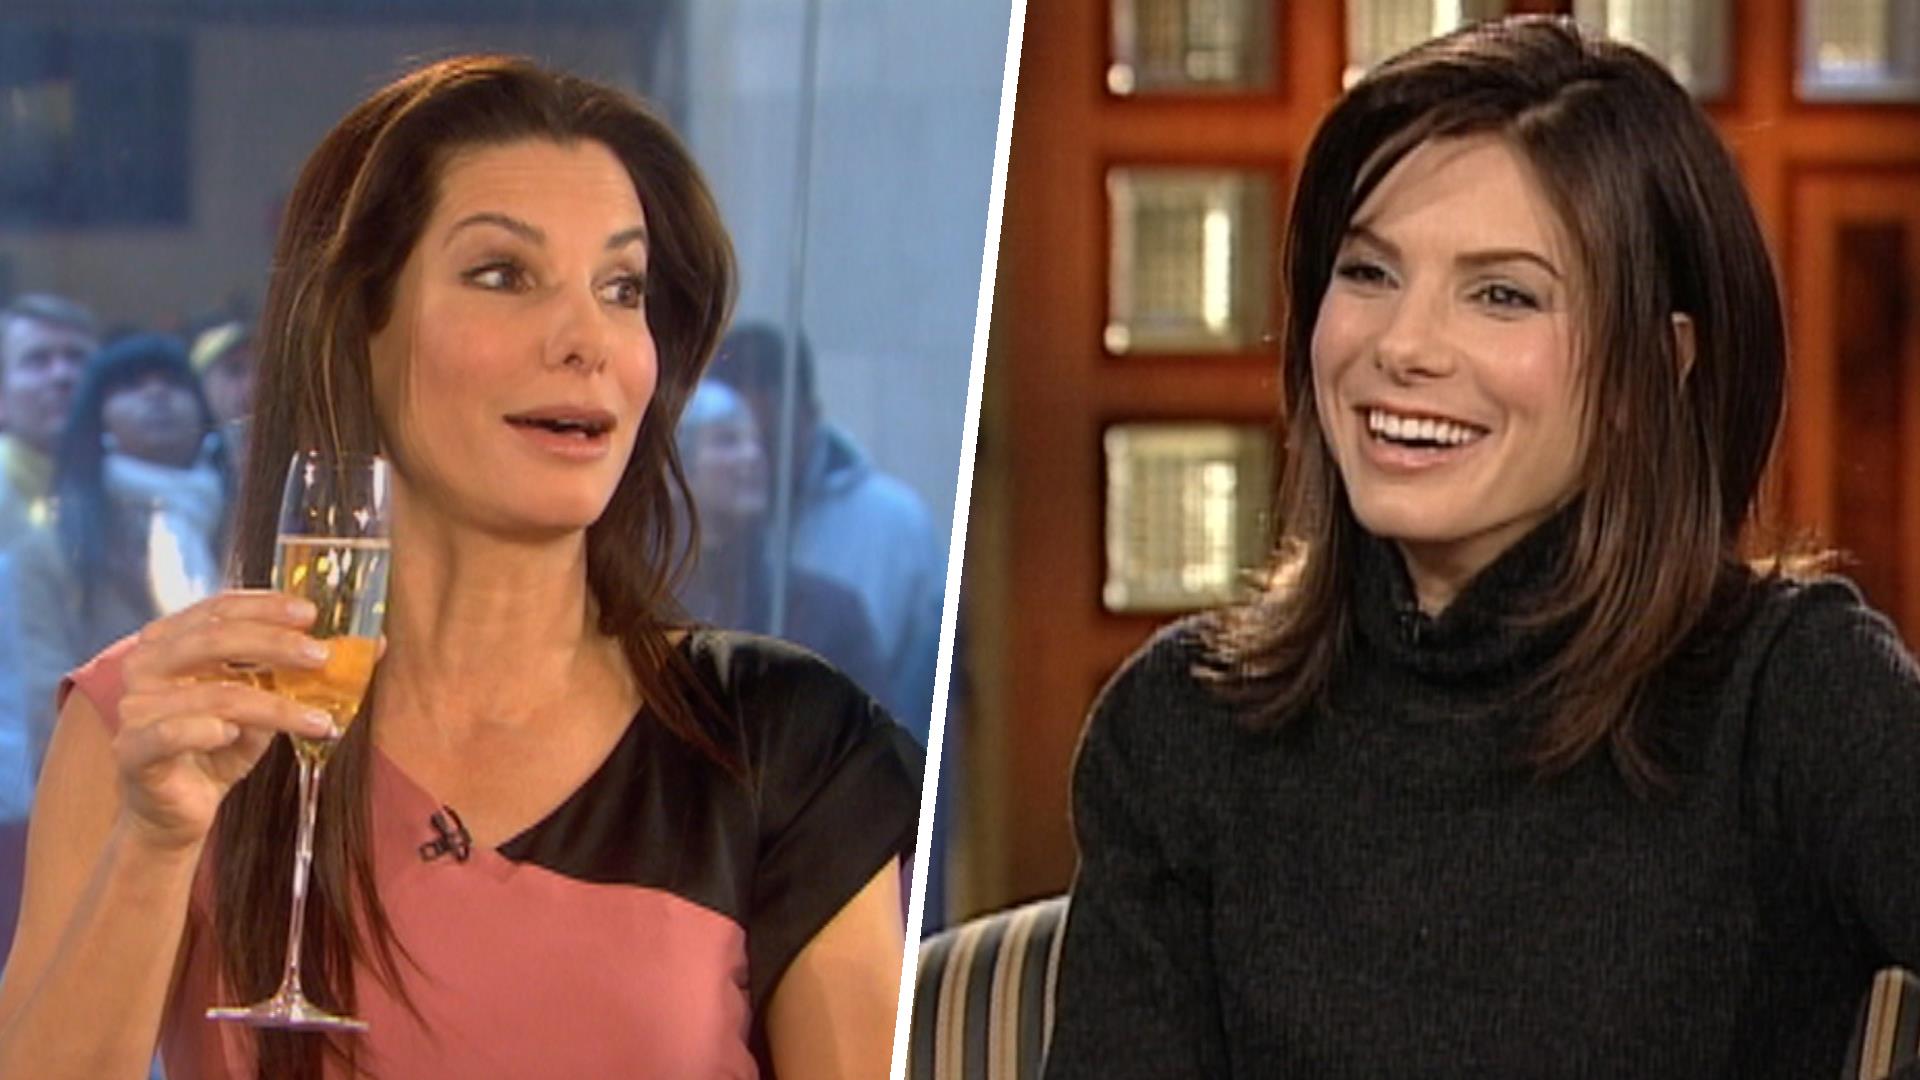 Sandra Bullock opens up about family struggle with unexpected ending on  live TV